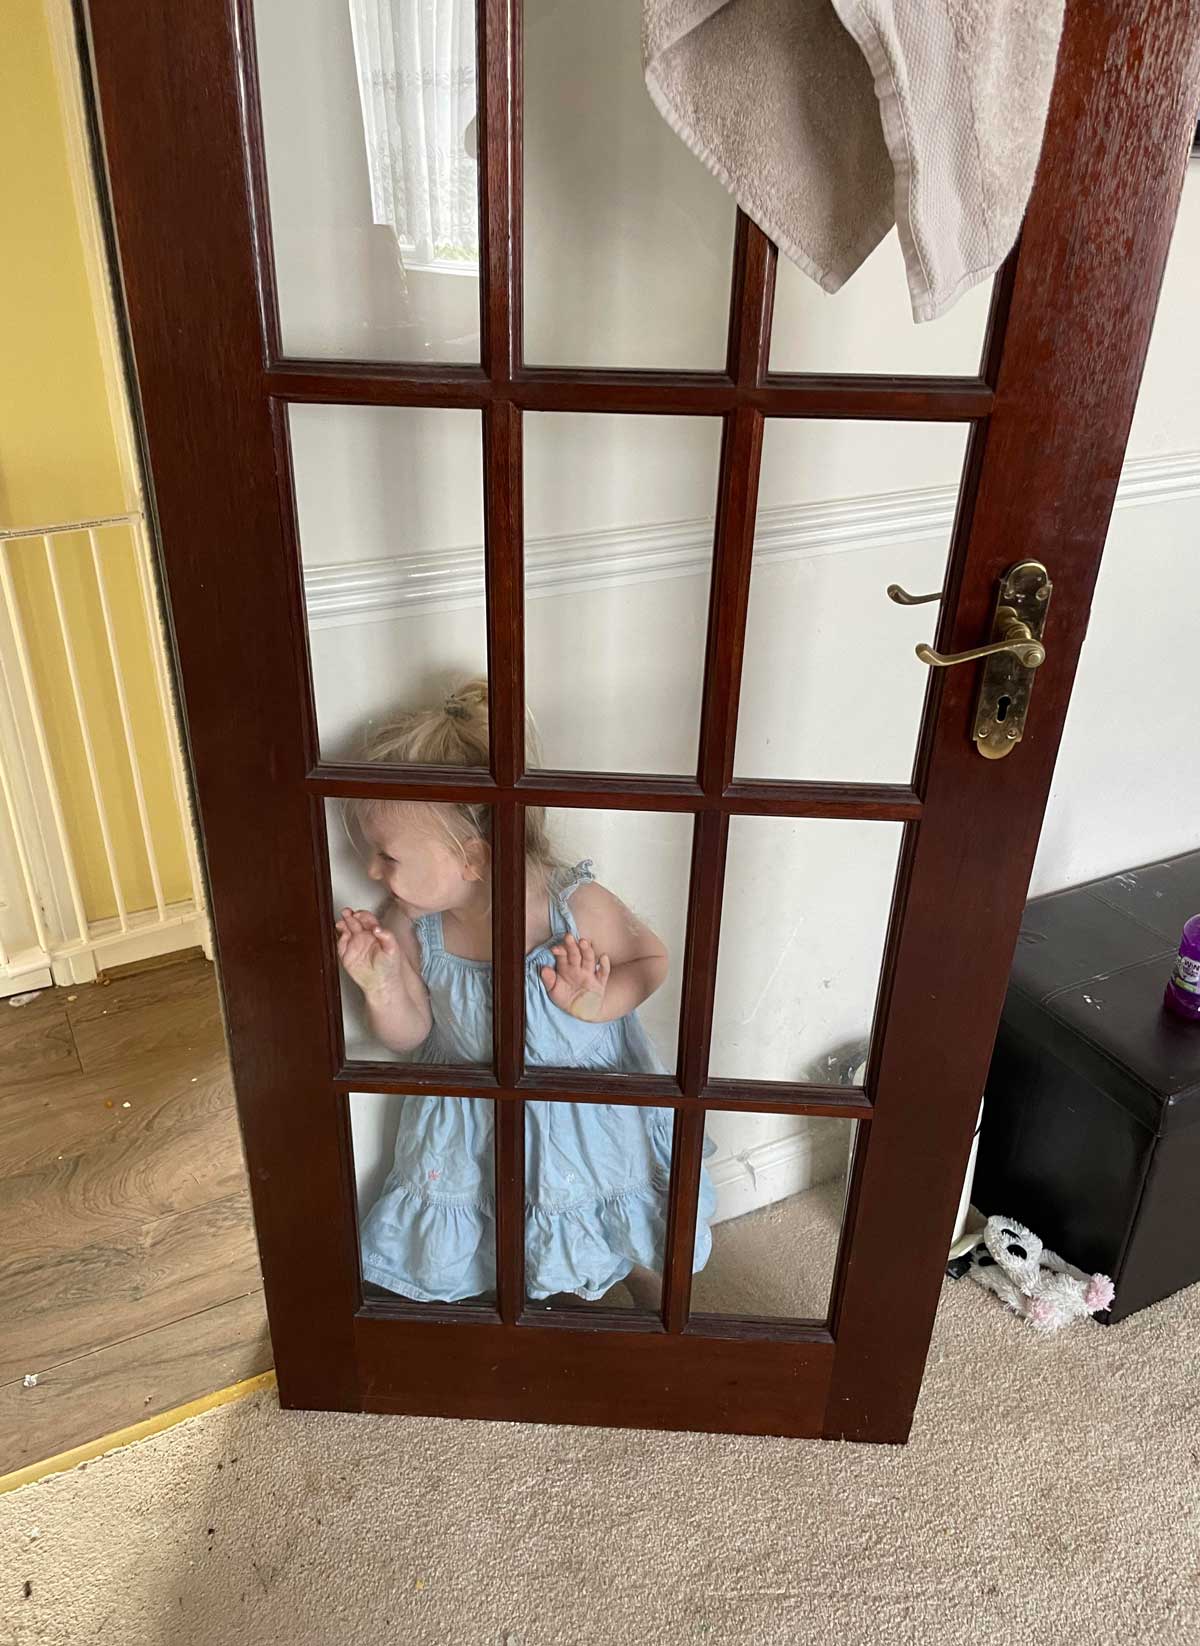 Playing hide and seek with a toddler is always a thrill